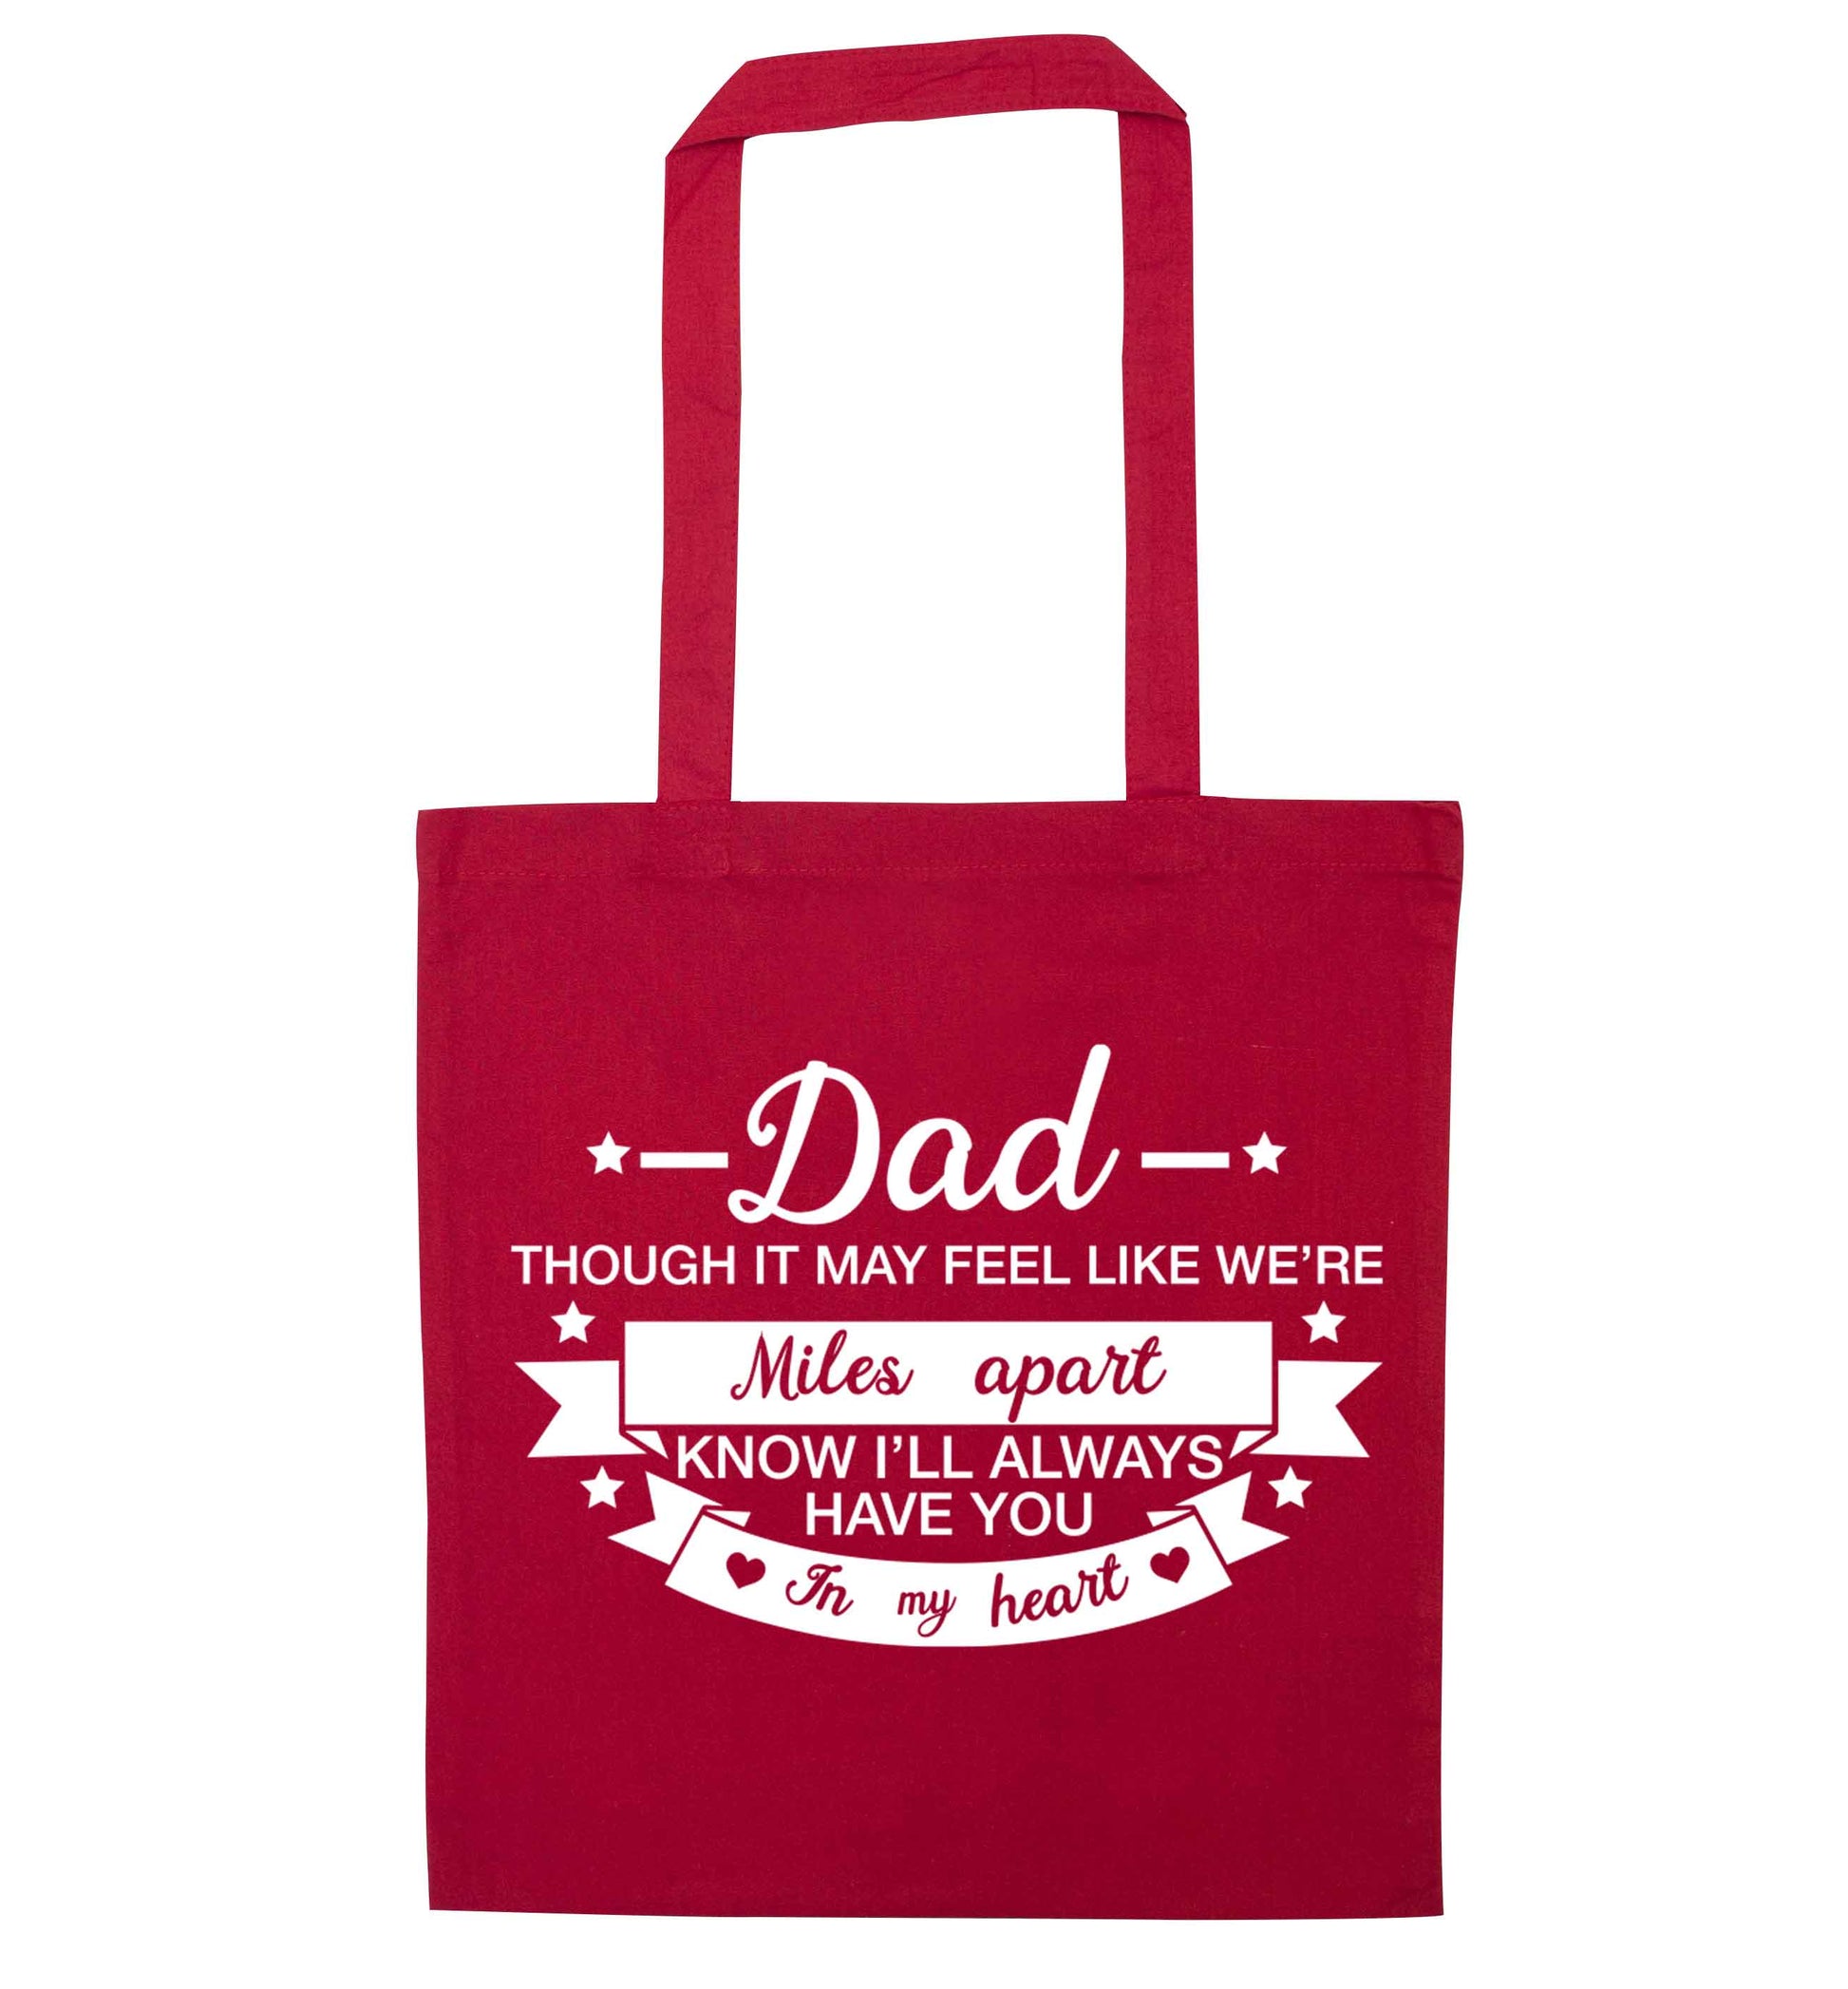 Dad though it may feel like we're miles apart know I'll always have you in my heart red tote bag